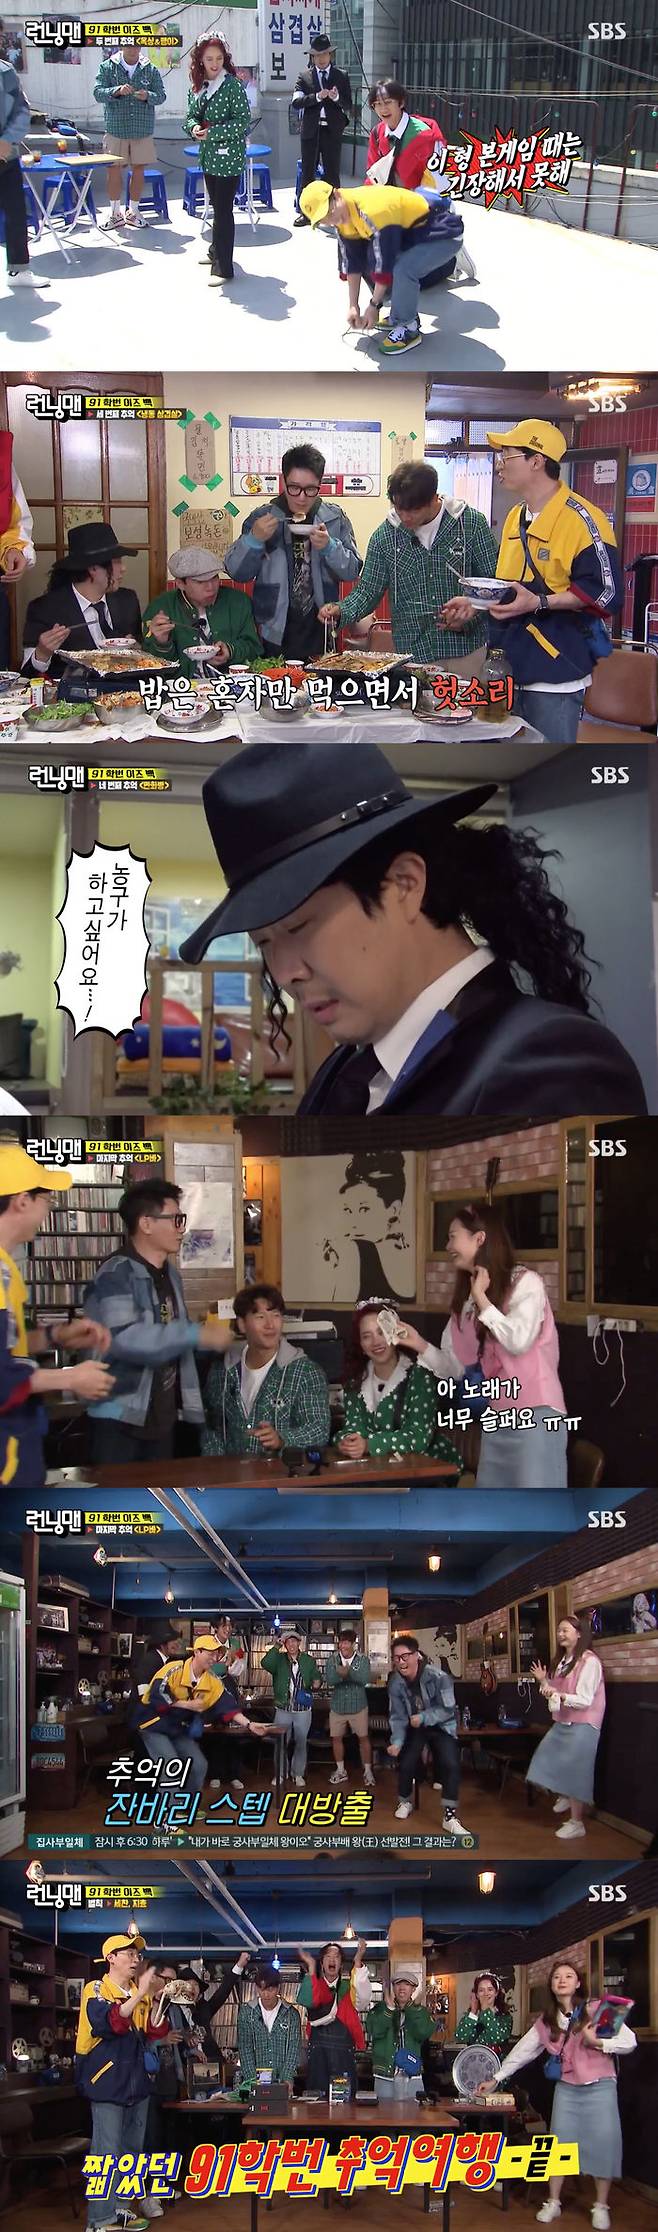 Running Man took a memorable trip in the 90sOn SBS Running Man broadcasted on the 2nd, 91th Is Back Race was held.On the day of the show, the members went to the billiard room, the comic book room, and soaked in memories of the 90s.The last mission place was LP Room. Running Man applied for songs containing their stories, and the boss heard the story and selected a ball for the song.The first story to be released was by Yang Se-chan; Yang Se-chan said: I had a big fire at home in 95.I regret that I asked my parents for 500 won to go to the arcade without thinking about it when I was not in the iron. And Ji Suk-jin and Yoo Jae-Suk have released a love story that ended in incomplete high school days; Lee also said, I was robbed in my house in the 90s.My mother was struggling. I am an invalid. If you pick this song that your mother likes today, it will be the first time. Finally, Kim Jong-kook said, The singer was a dream, but I wanted to give up my dream because of my parents opposition. I applied for the mask of Choi Ho-seop, who enjoyed it among the many popular songs that comforted me in those days.The story of Kim Jong-kook was selected by the president among many applications.Running Man was in memories of each of them, singing The Year is Mask. Especially, Jeon So-min surprised everyone by tears while listening to the song.Jeon So-min cried, saying, The song is so sad, and the other members laughed at the embarrassment.To get the last gift, Running Man showed dance to the bosss selection.In particular, Ji Suk-jin laughed at his 20-year-old Touch by Touch and was happier than ever.On the other hand, Yang Se-chan and Song Ji-hyo, who won the least gifts on the day, were selected as penalties. The two penalties were made in the style of the 90s.The two men instantly squeezed conti and even showed Acting, raising expectations for the finished advertisement.